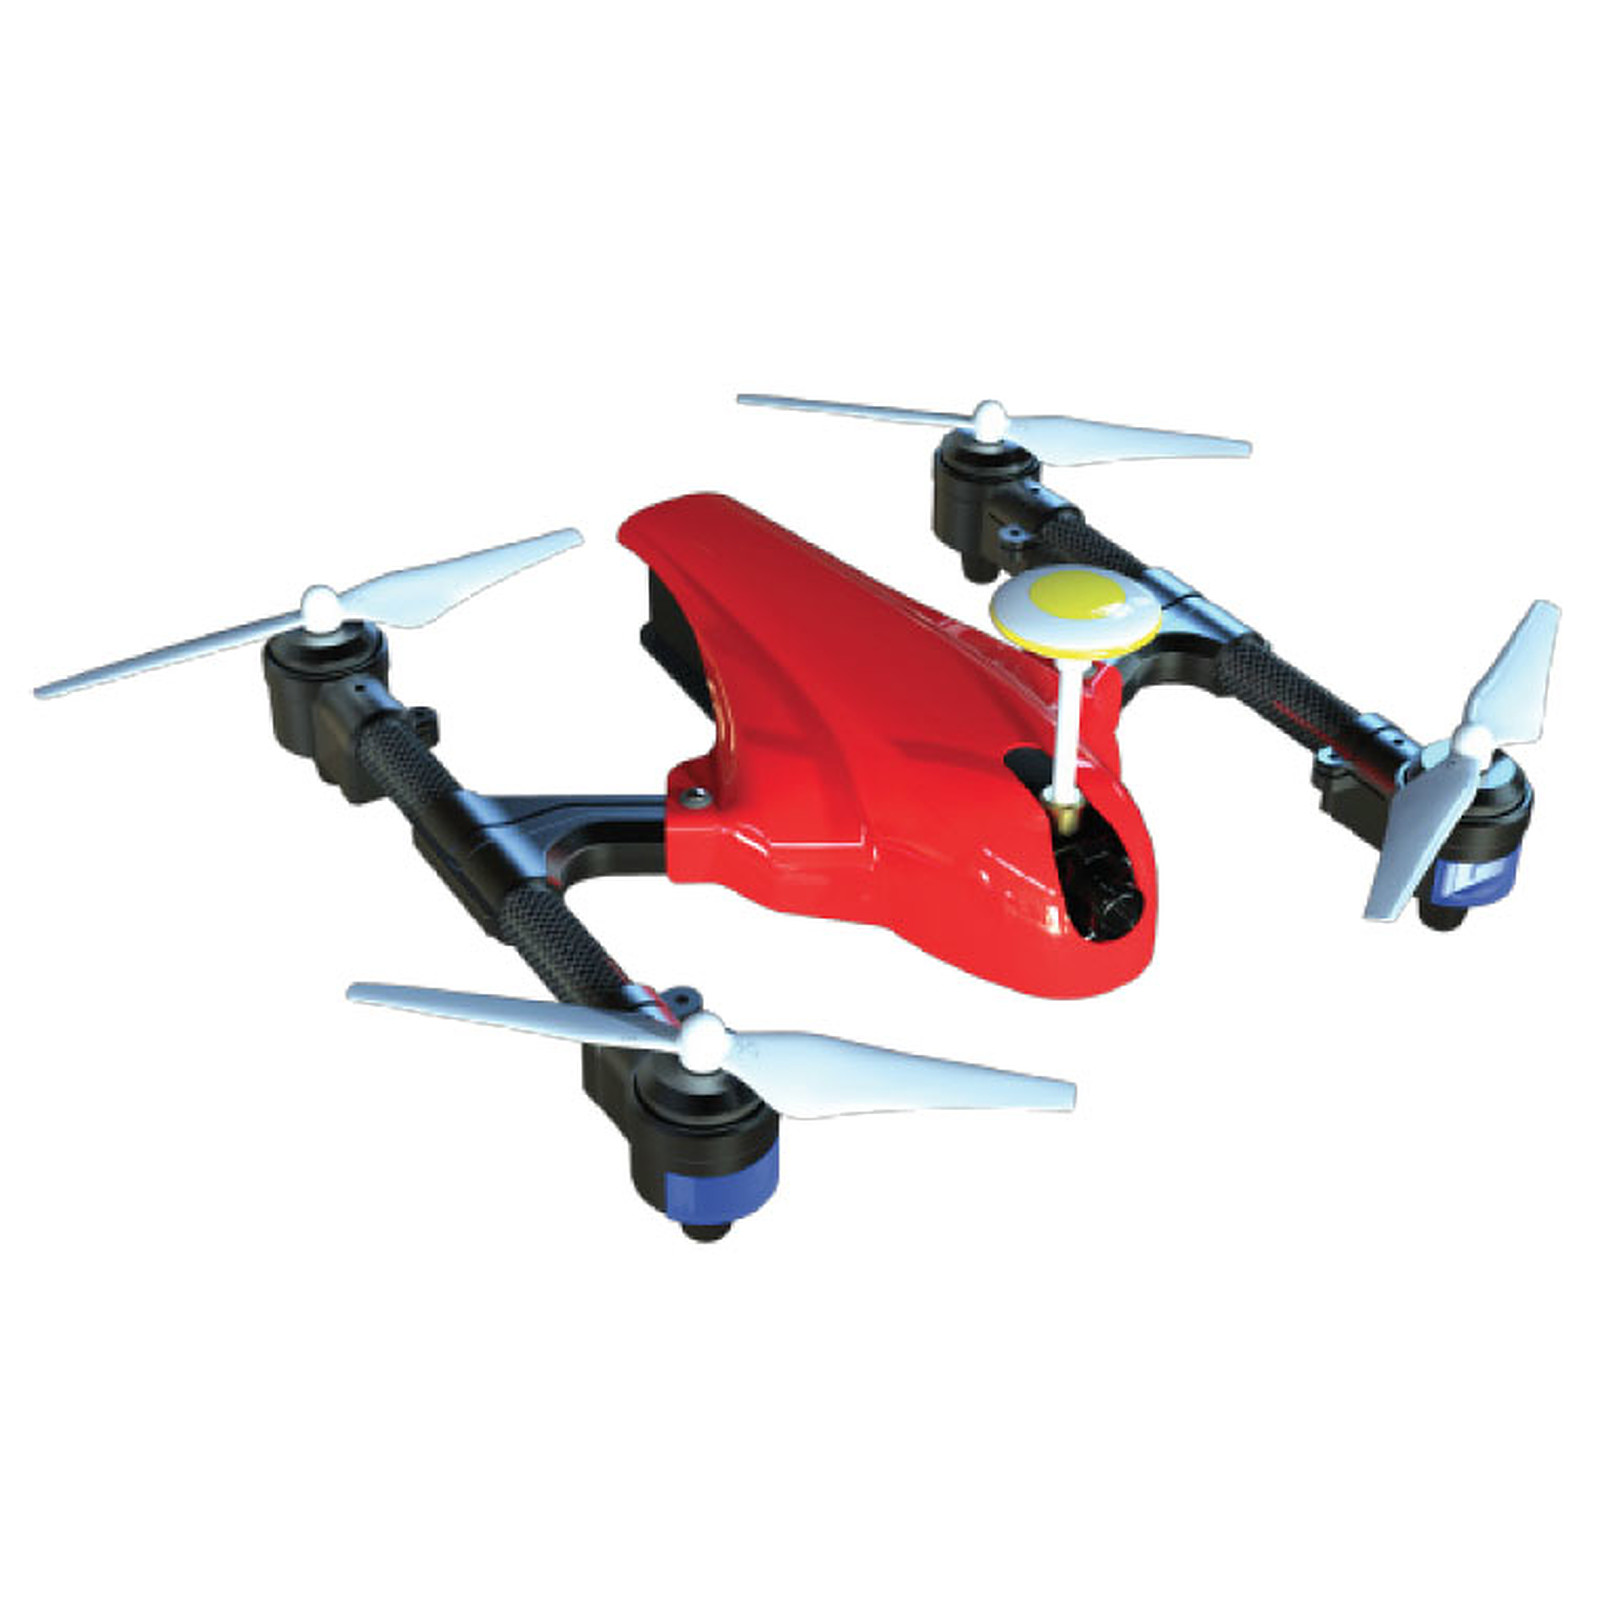 PNJ - Drone racer R-Speed PNJ - Camera et vol immersion compatible - Portee 200m - Rouge - Drone PNJ